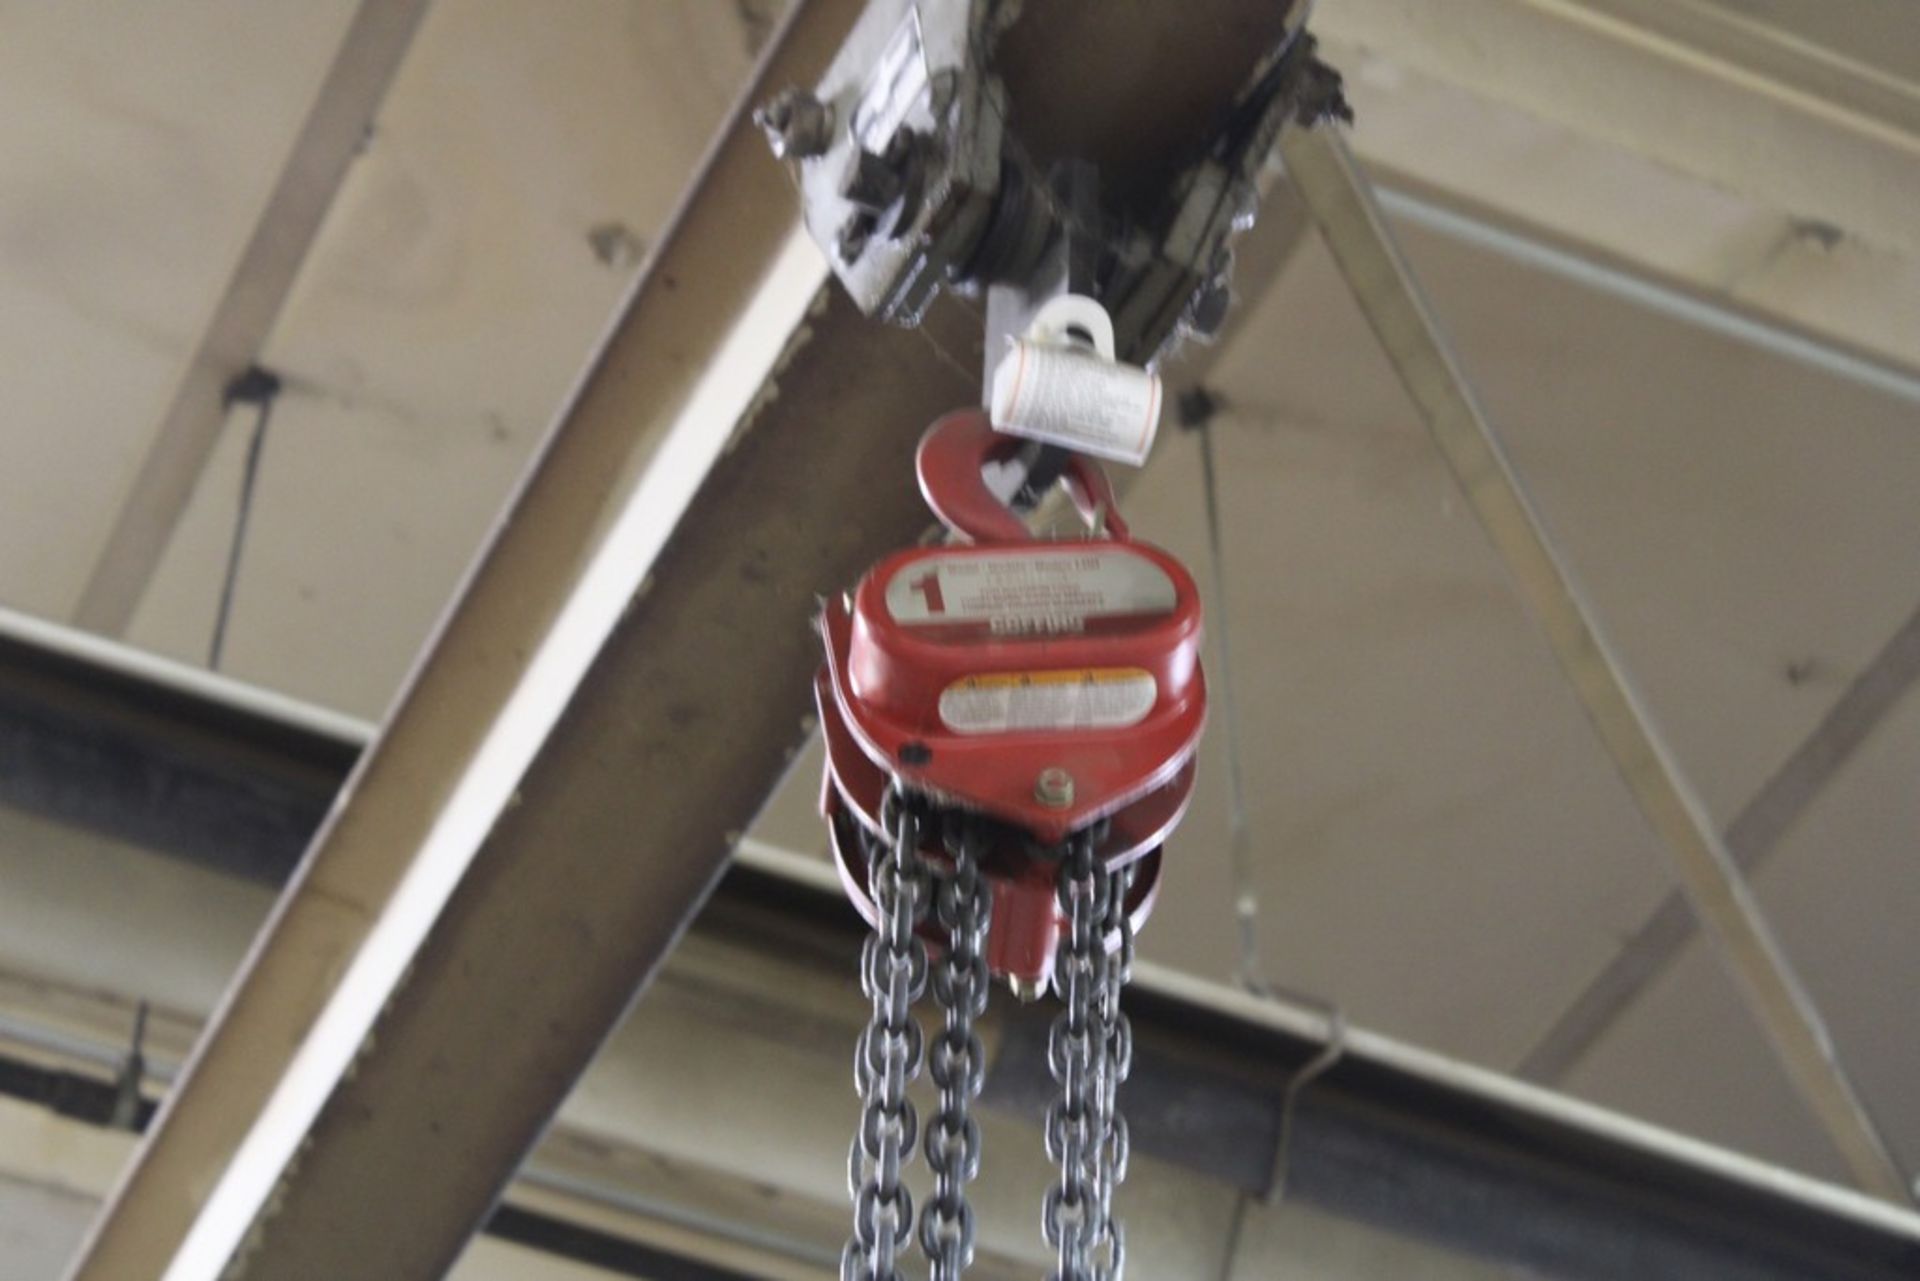 24' I-BEAM WITH COFFING 1 TON MANUAL CHAIN HOIST & TROLLEY (CAN LEAVE I-BEAM) - Image 3 of 4